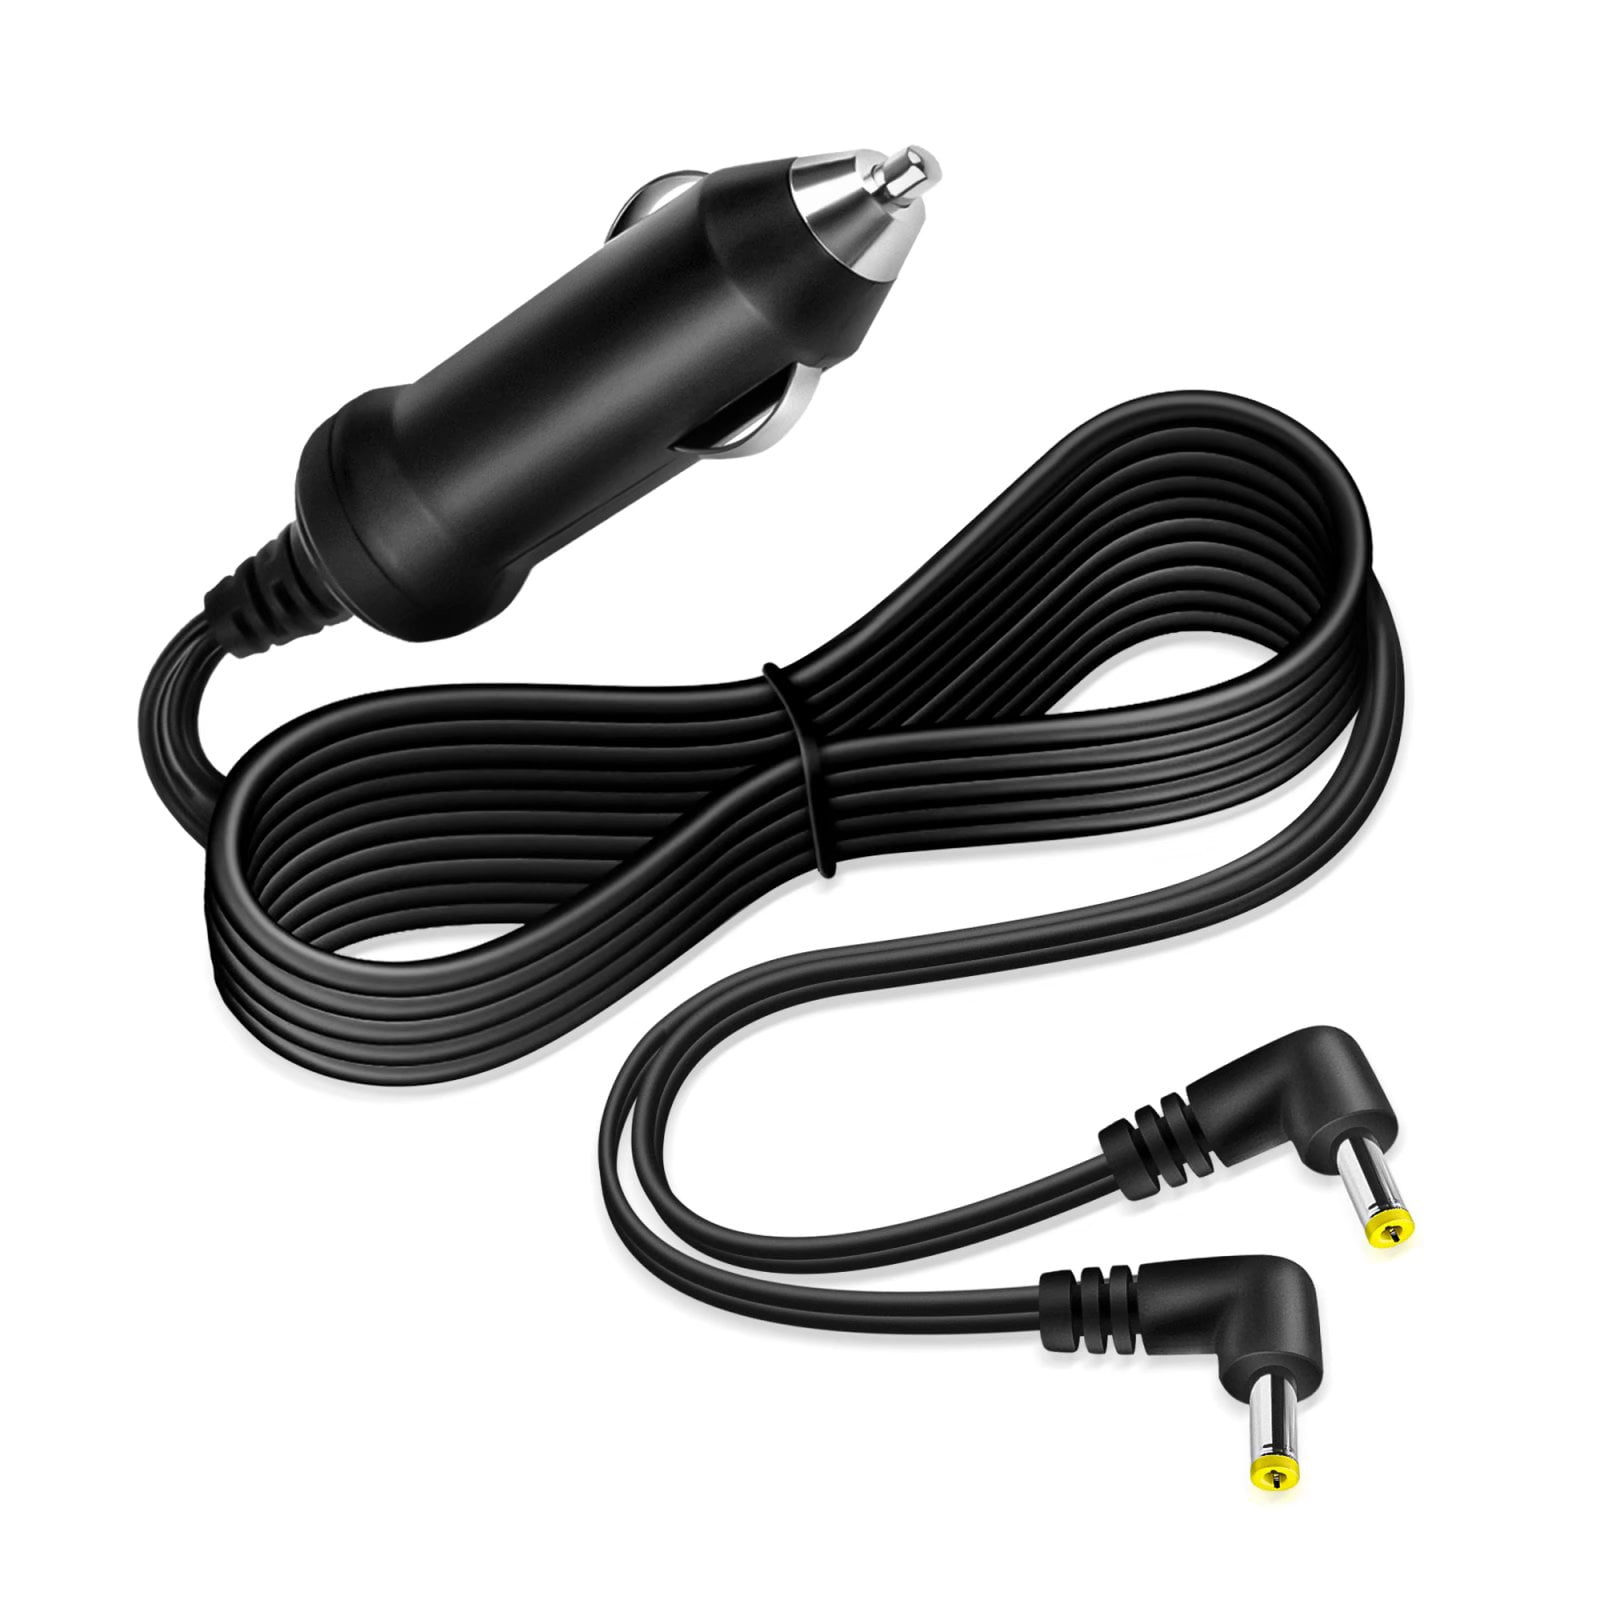 Car charger for Audiovox Jensen 3.5" NVX225 Touch-Screen GPS navigation system 